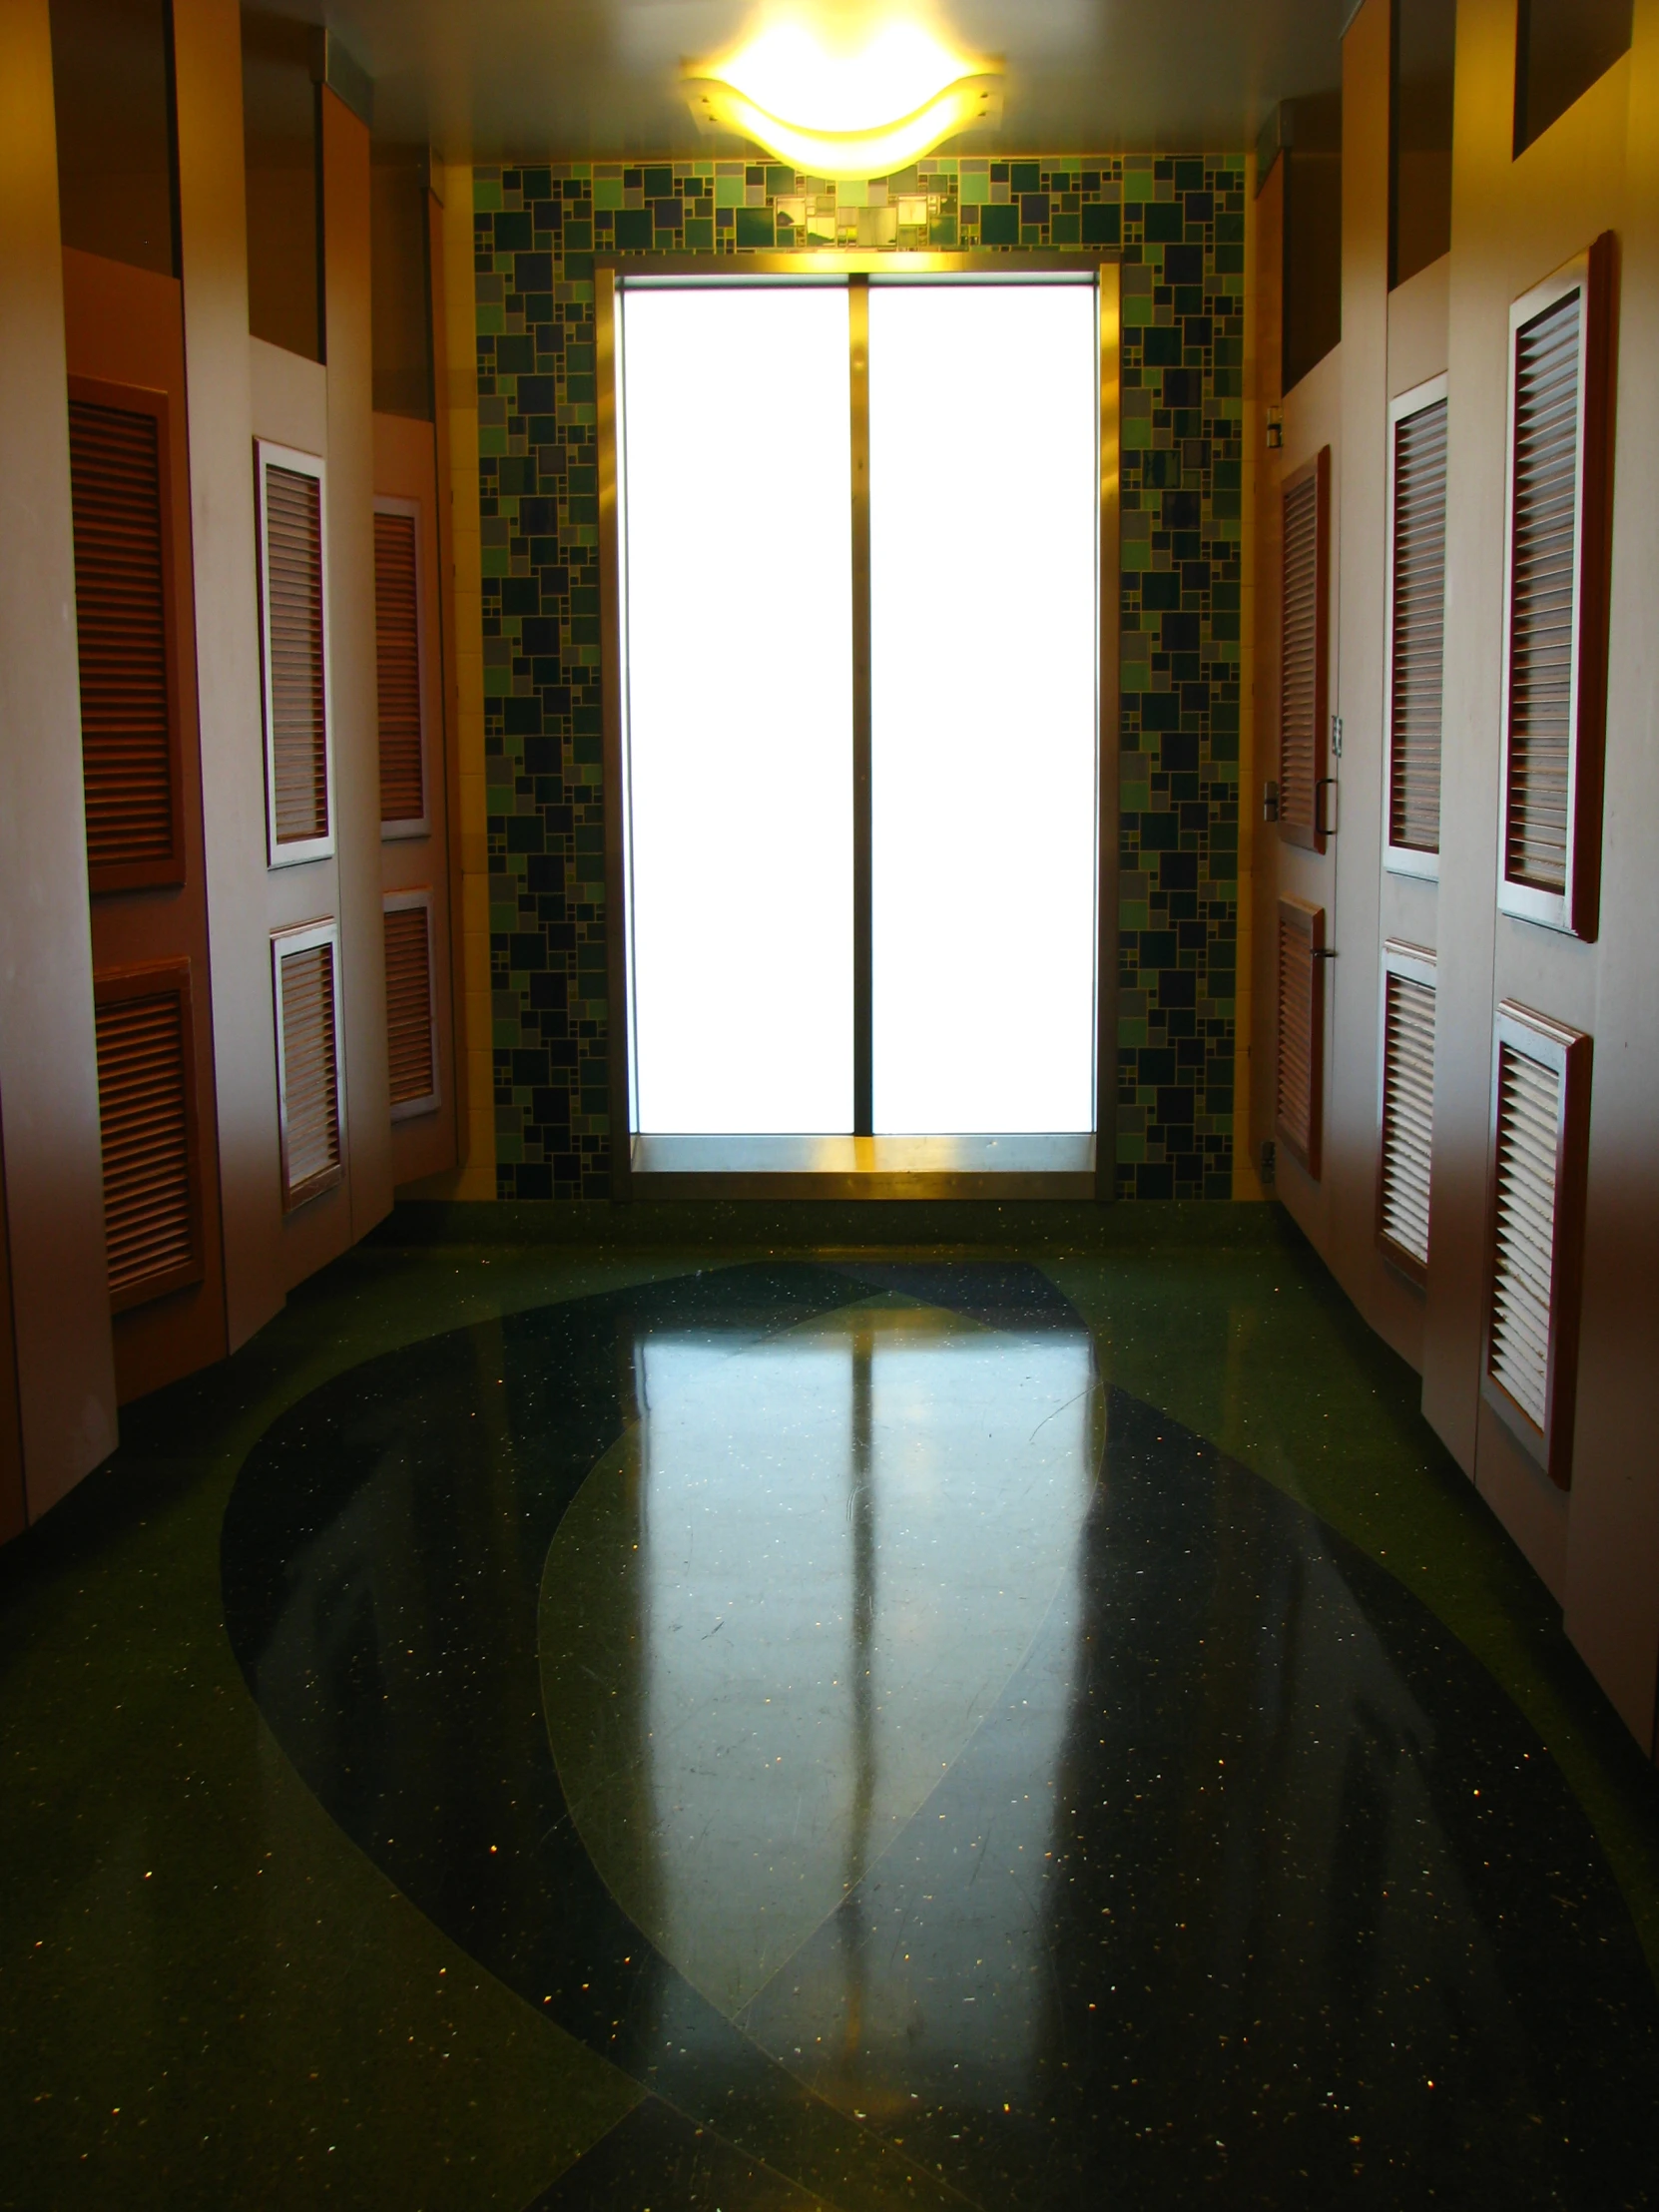 a hallway with multiple doors on each side